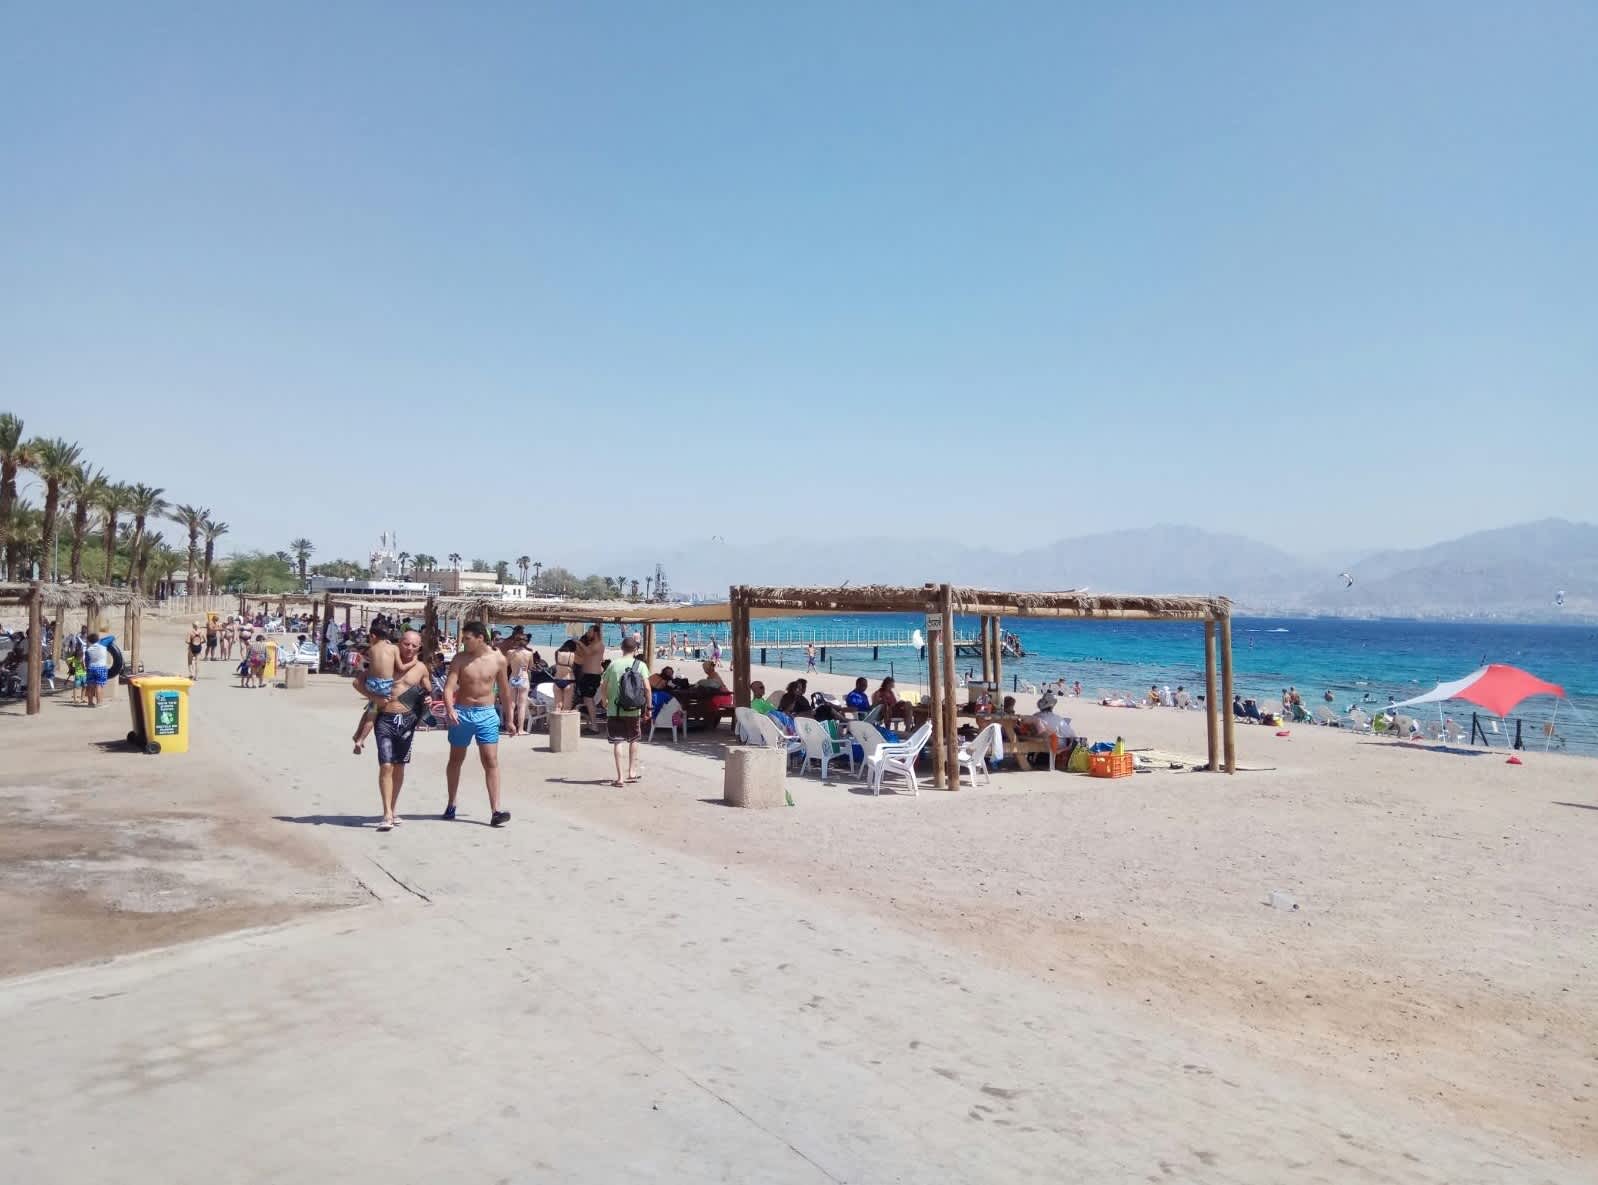 Basking in the sun at Eilat's Coral Beach. 